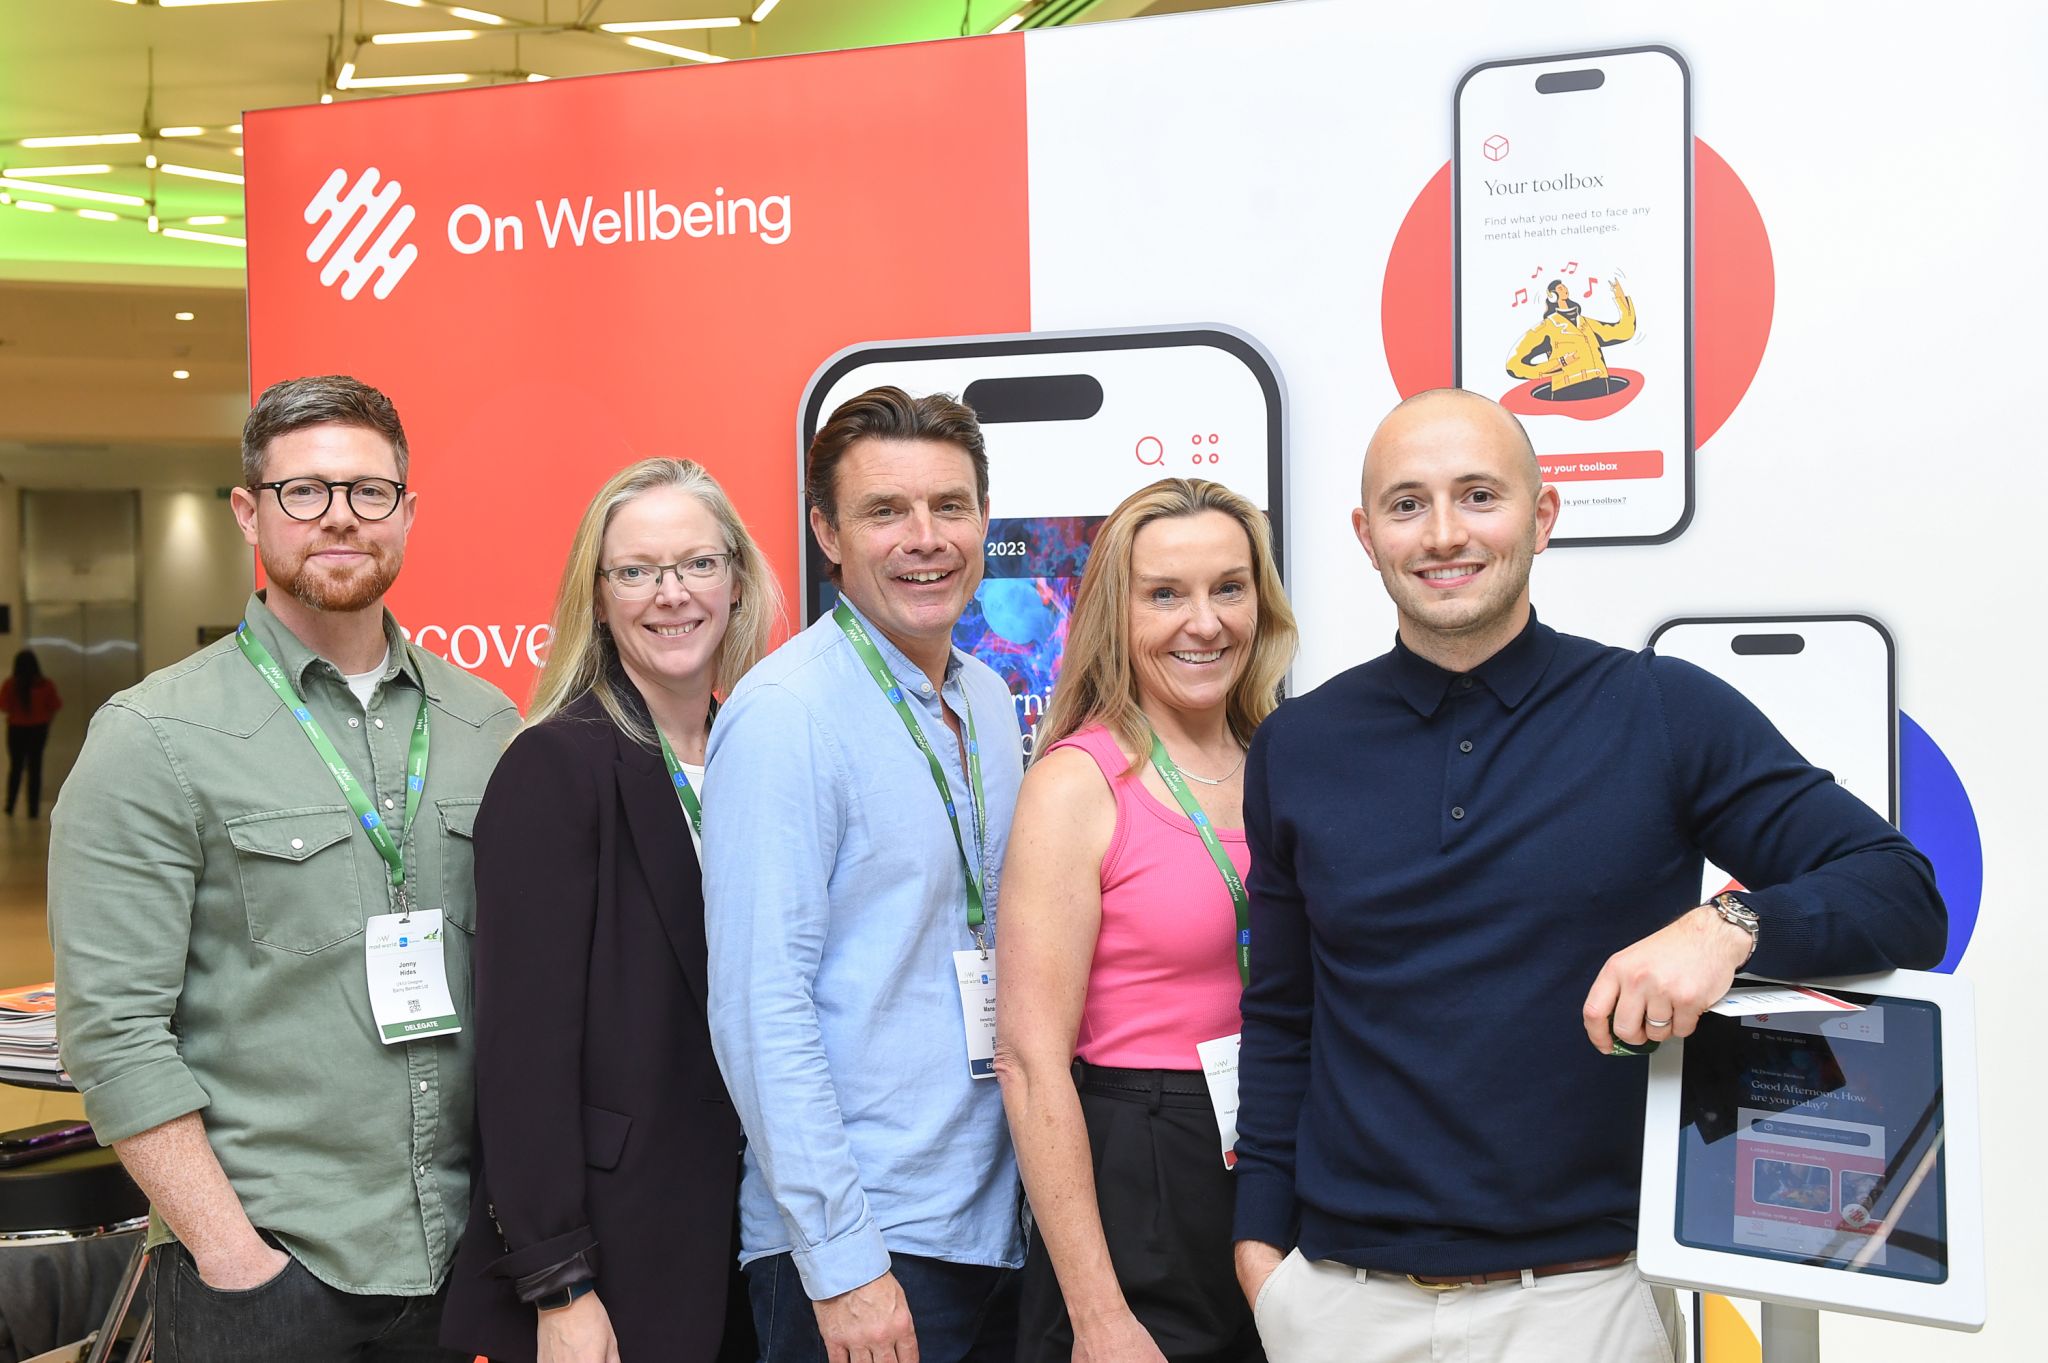 On Wellbeing launches unique corporate wellbeing app to connect with the hard to reach.